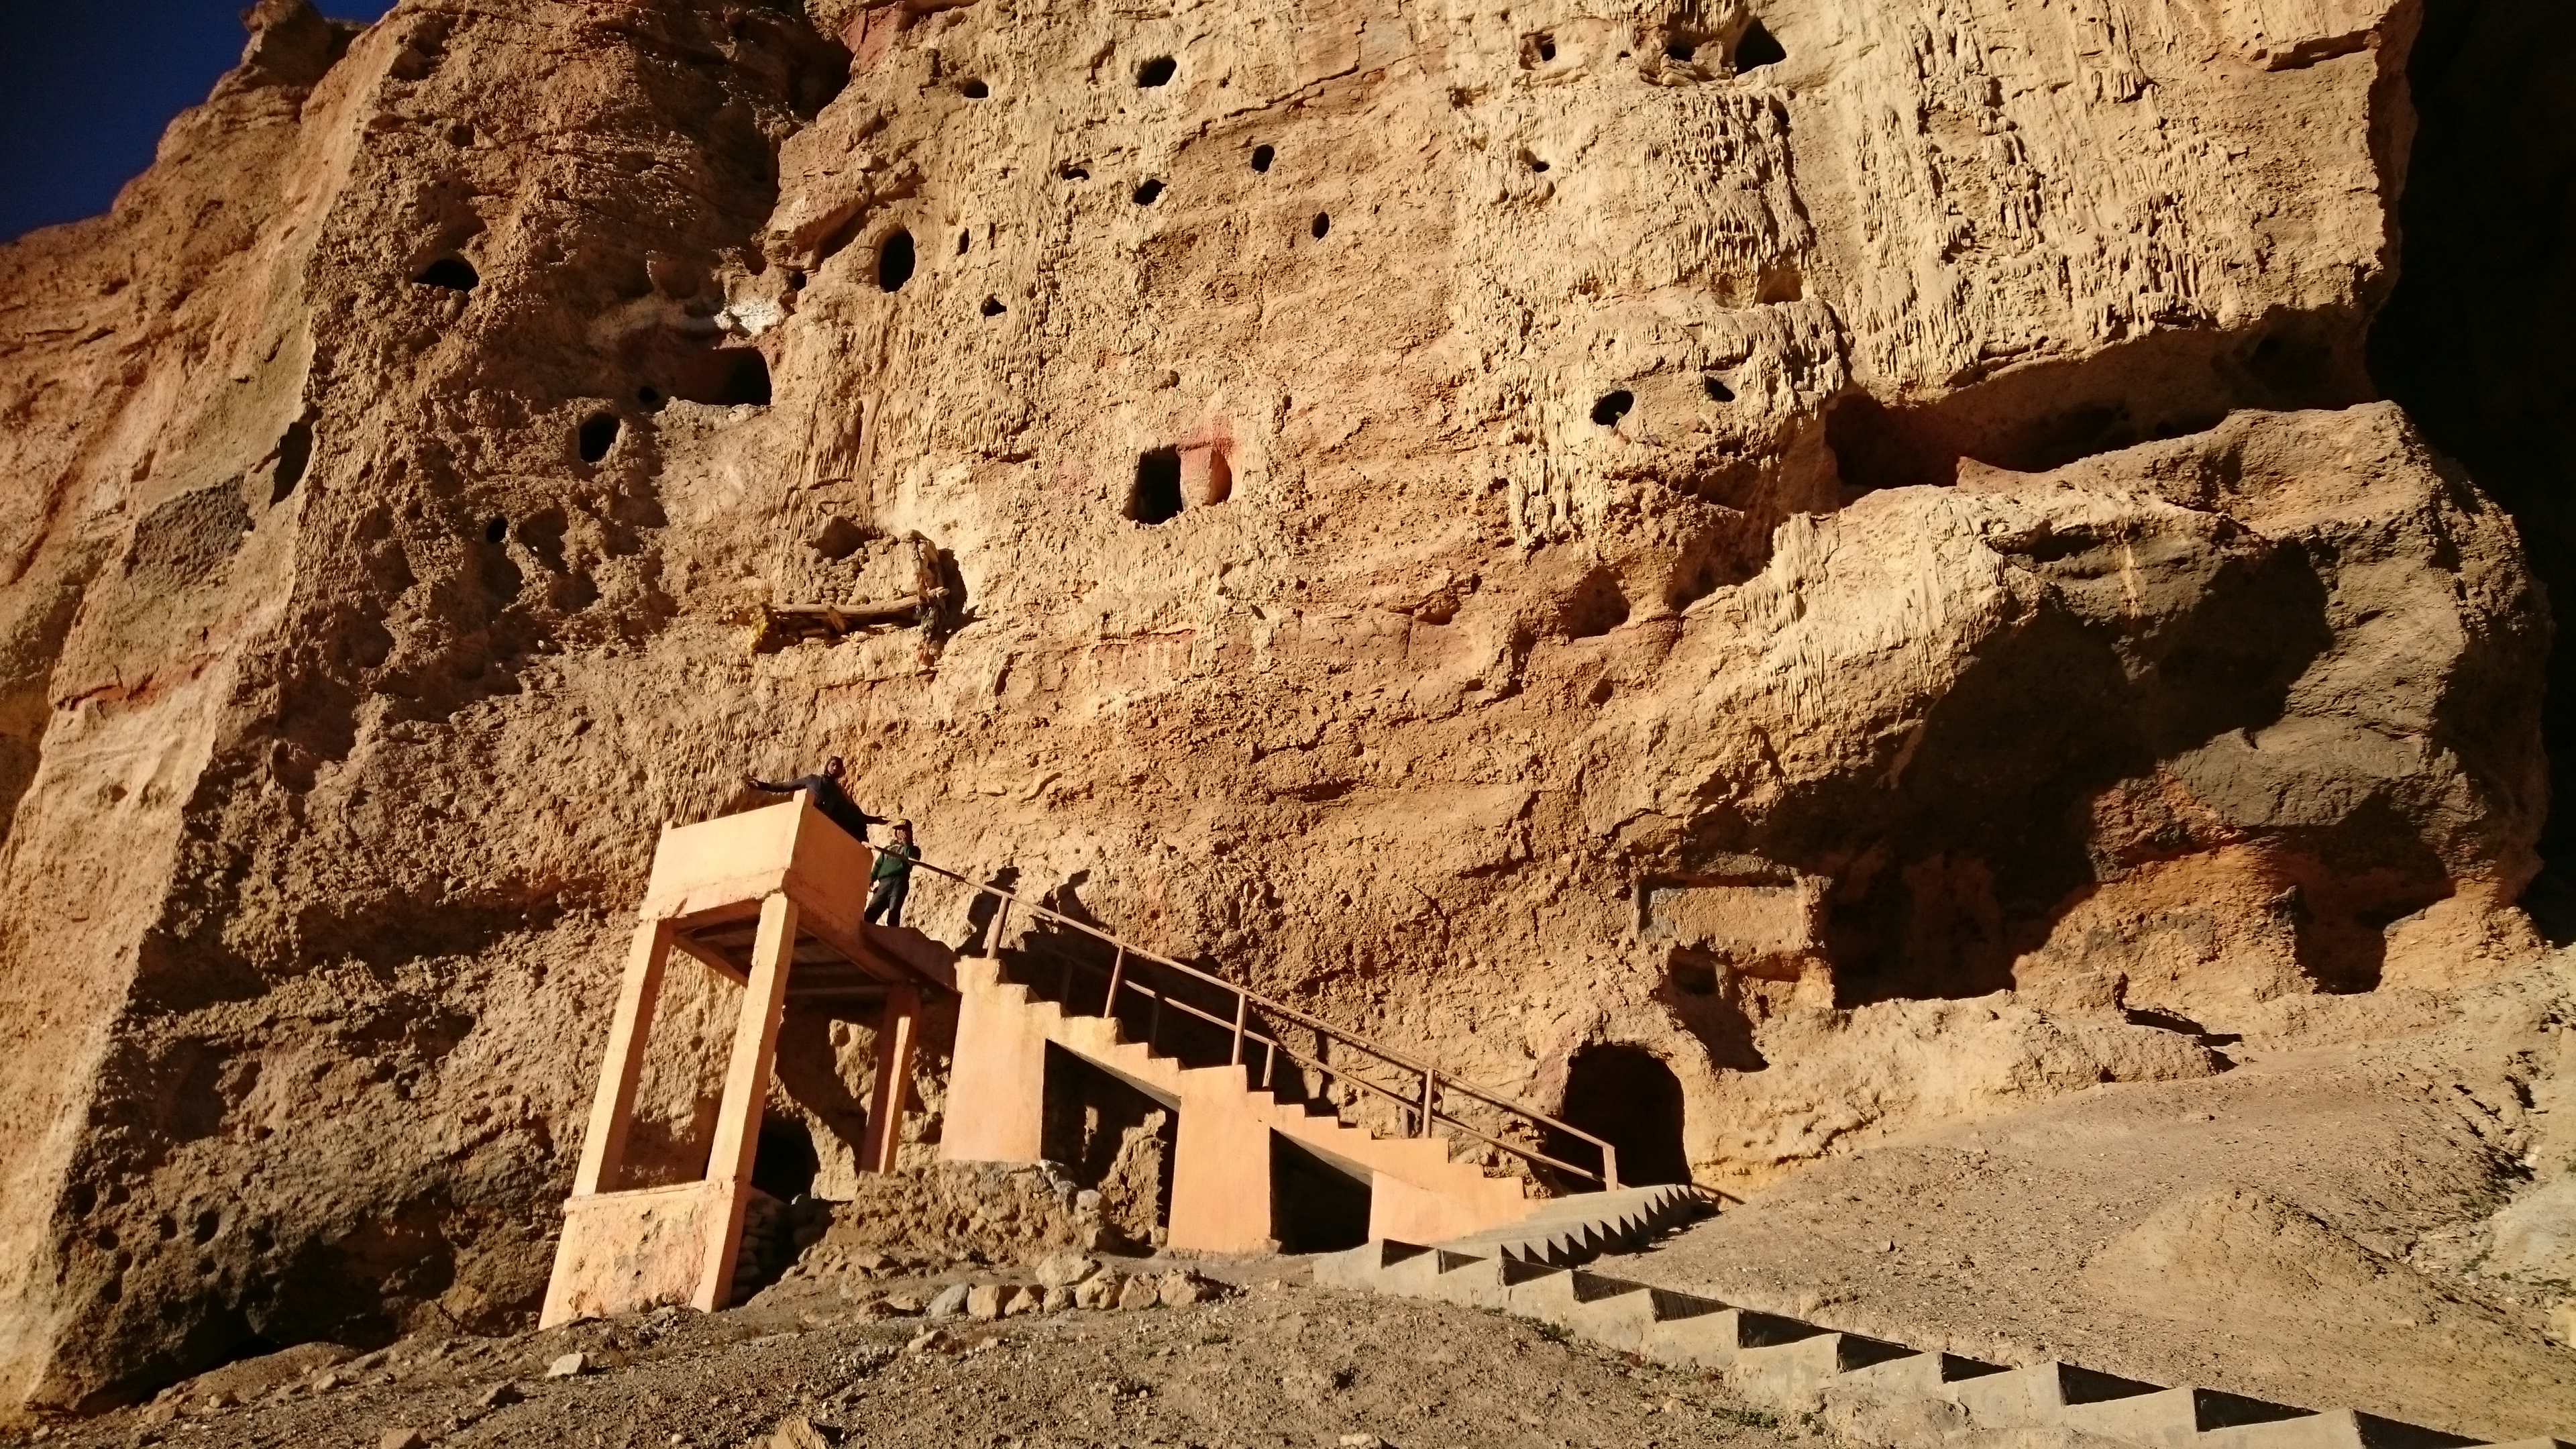 Chhoser Cave at Lo Manthang, Upper Mustang | Image Source: Wikimedia Commons